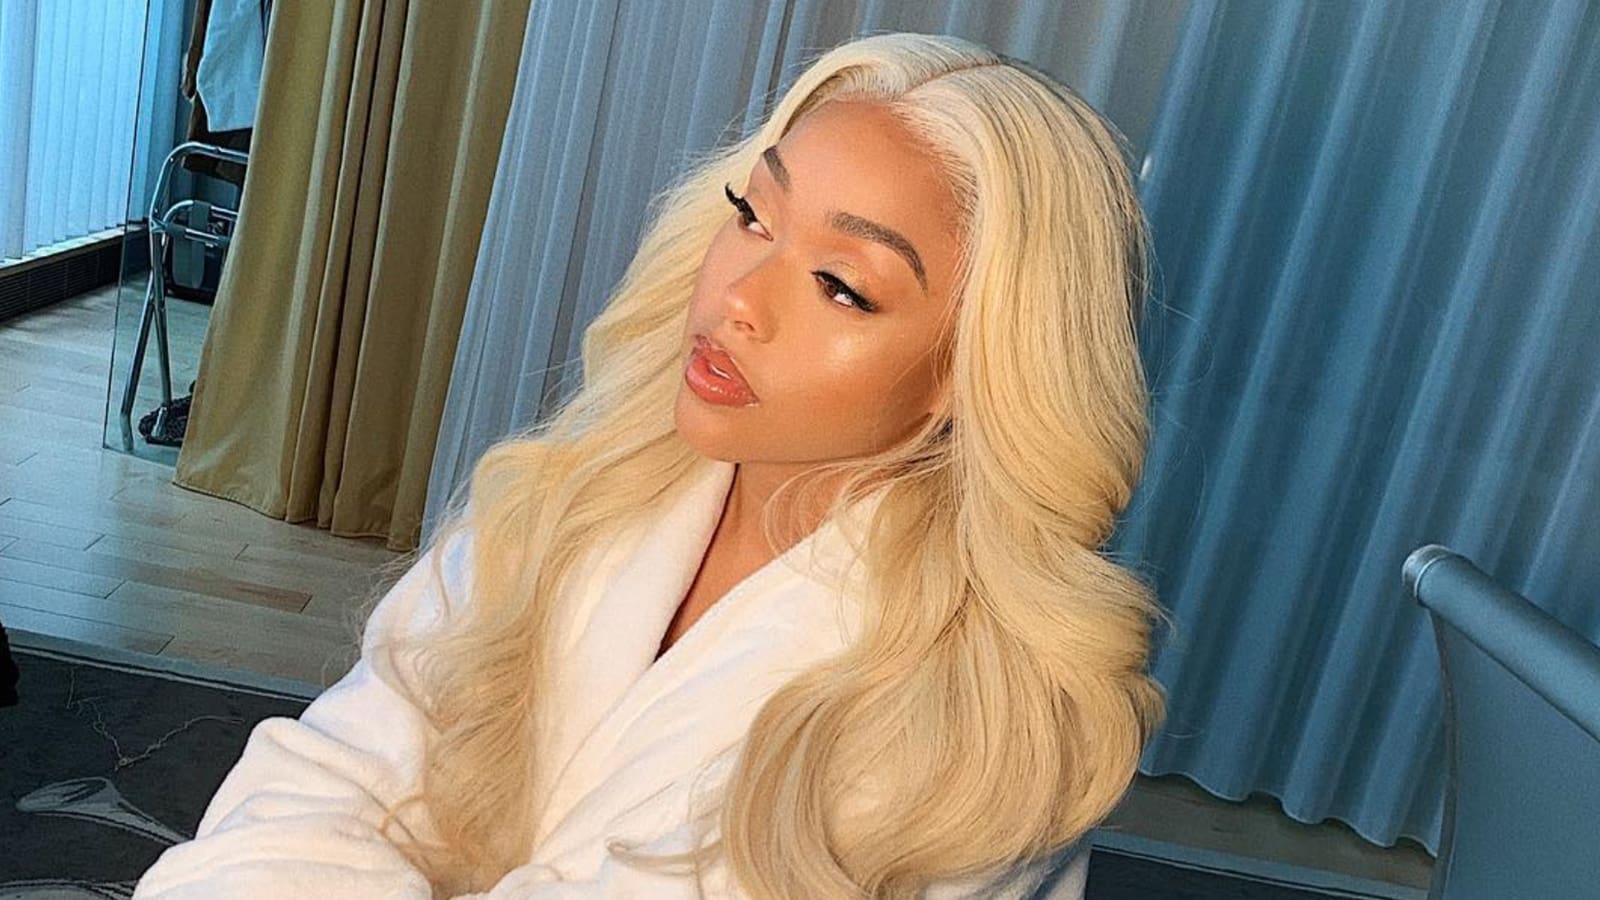 Jordyn Woods Blows Fans' Minds Away With Her Curves - See Her Recent Photo